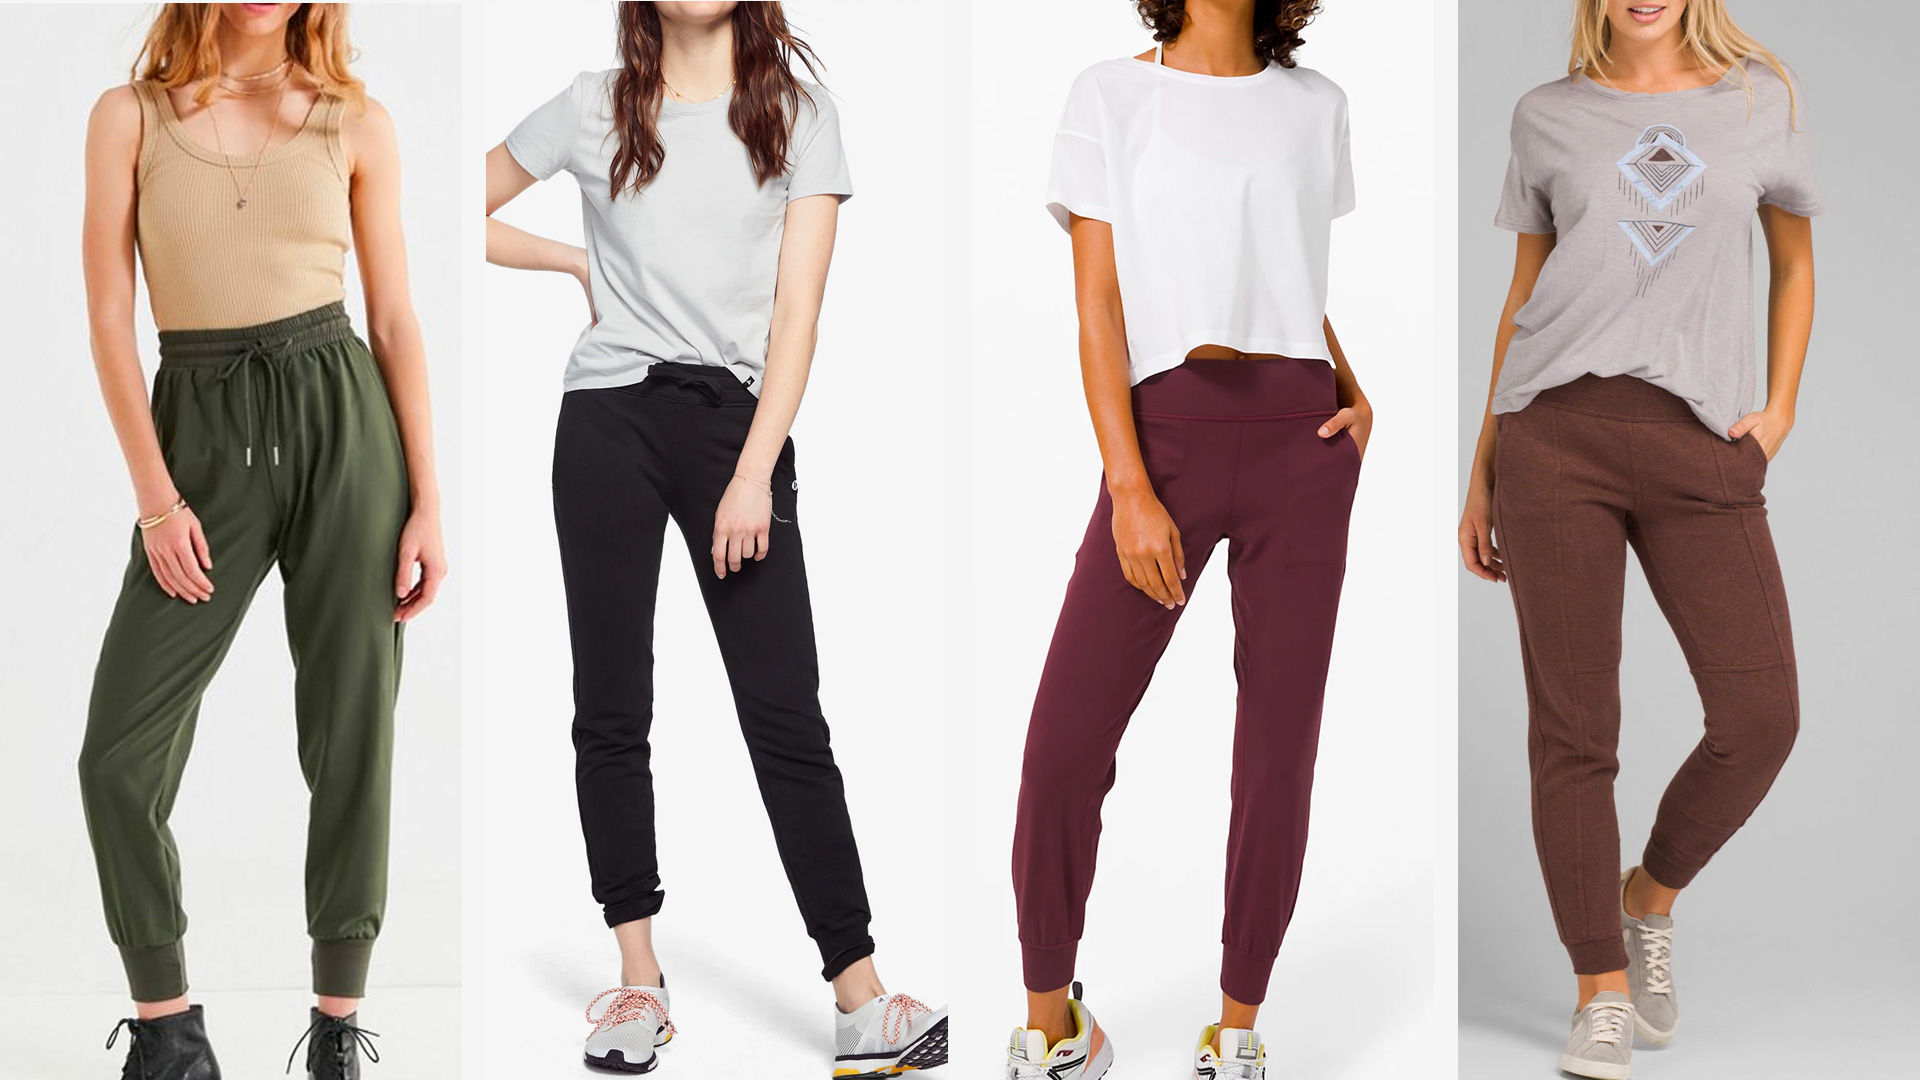 Buy > high waisted jogger dress pants > in stock